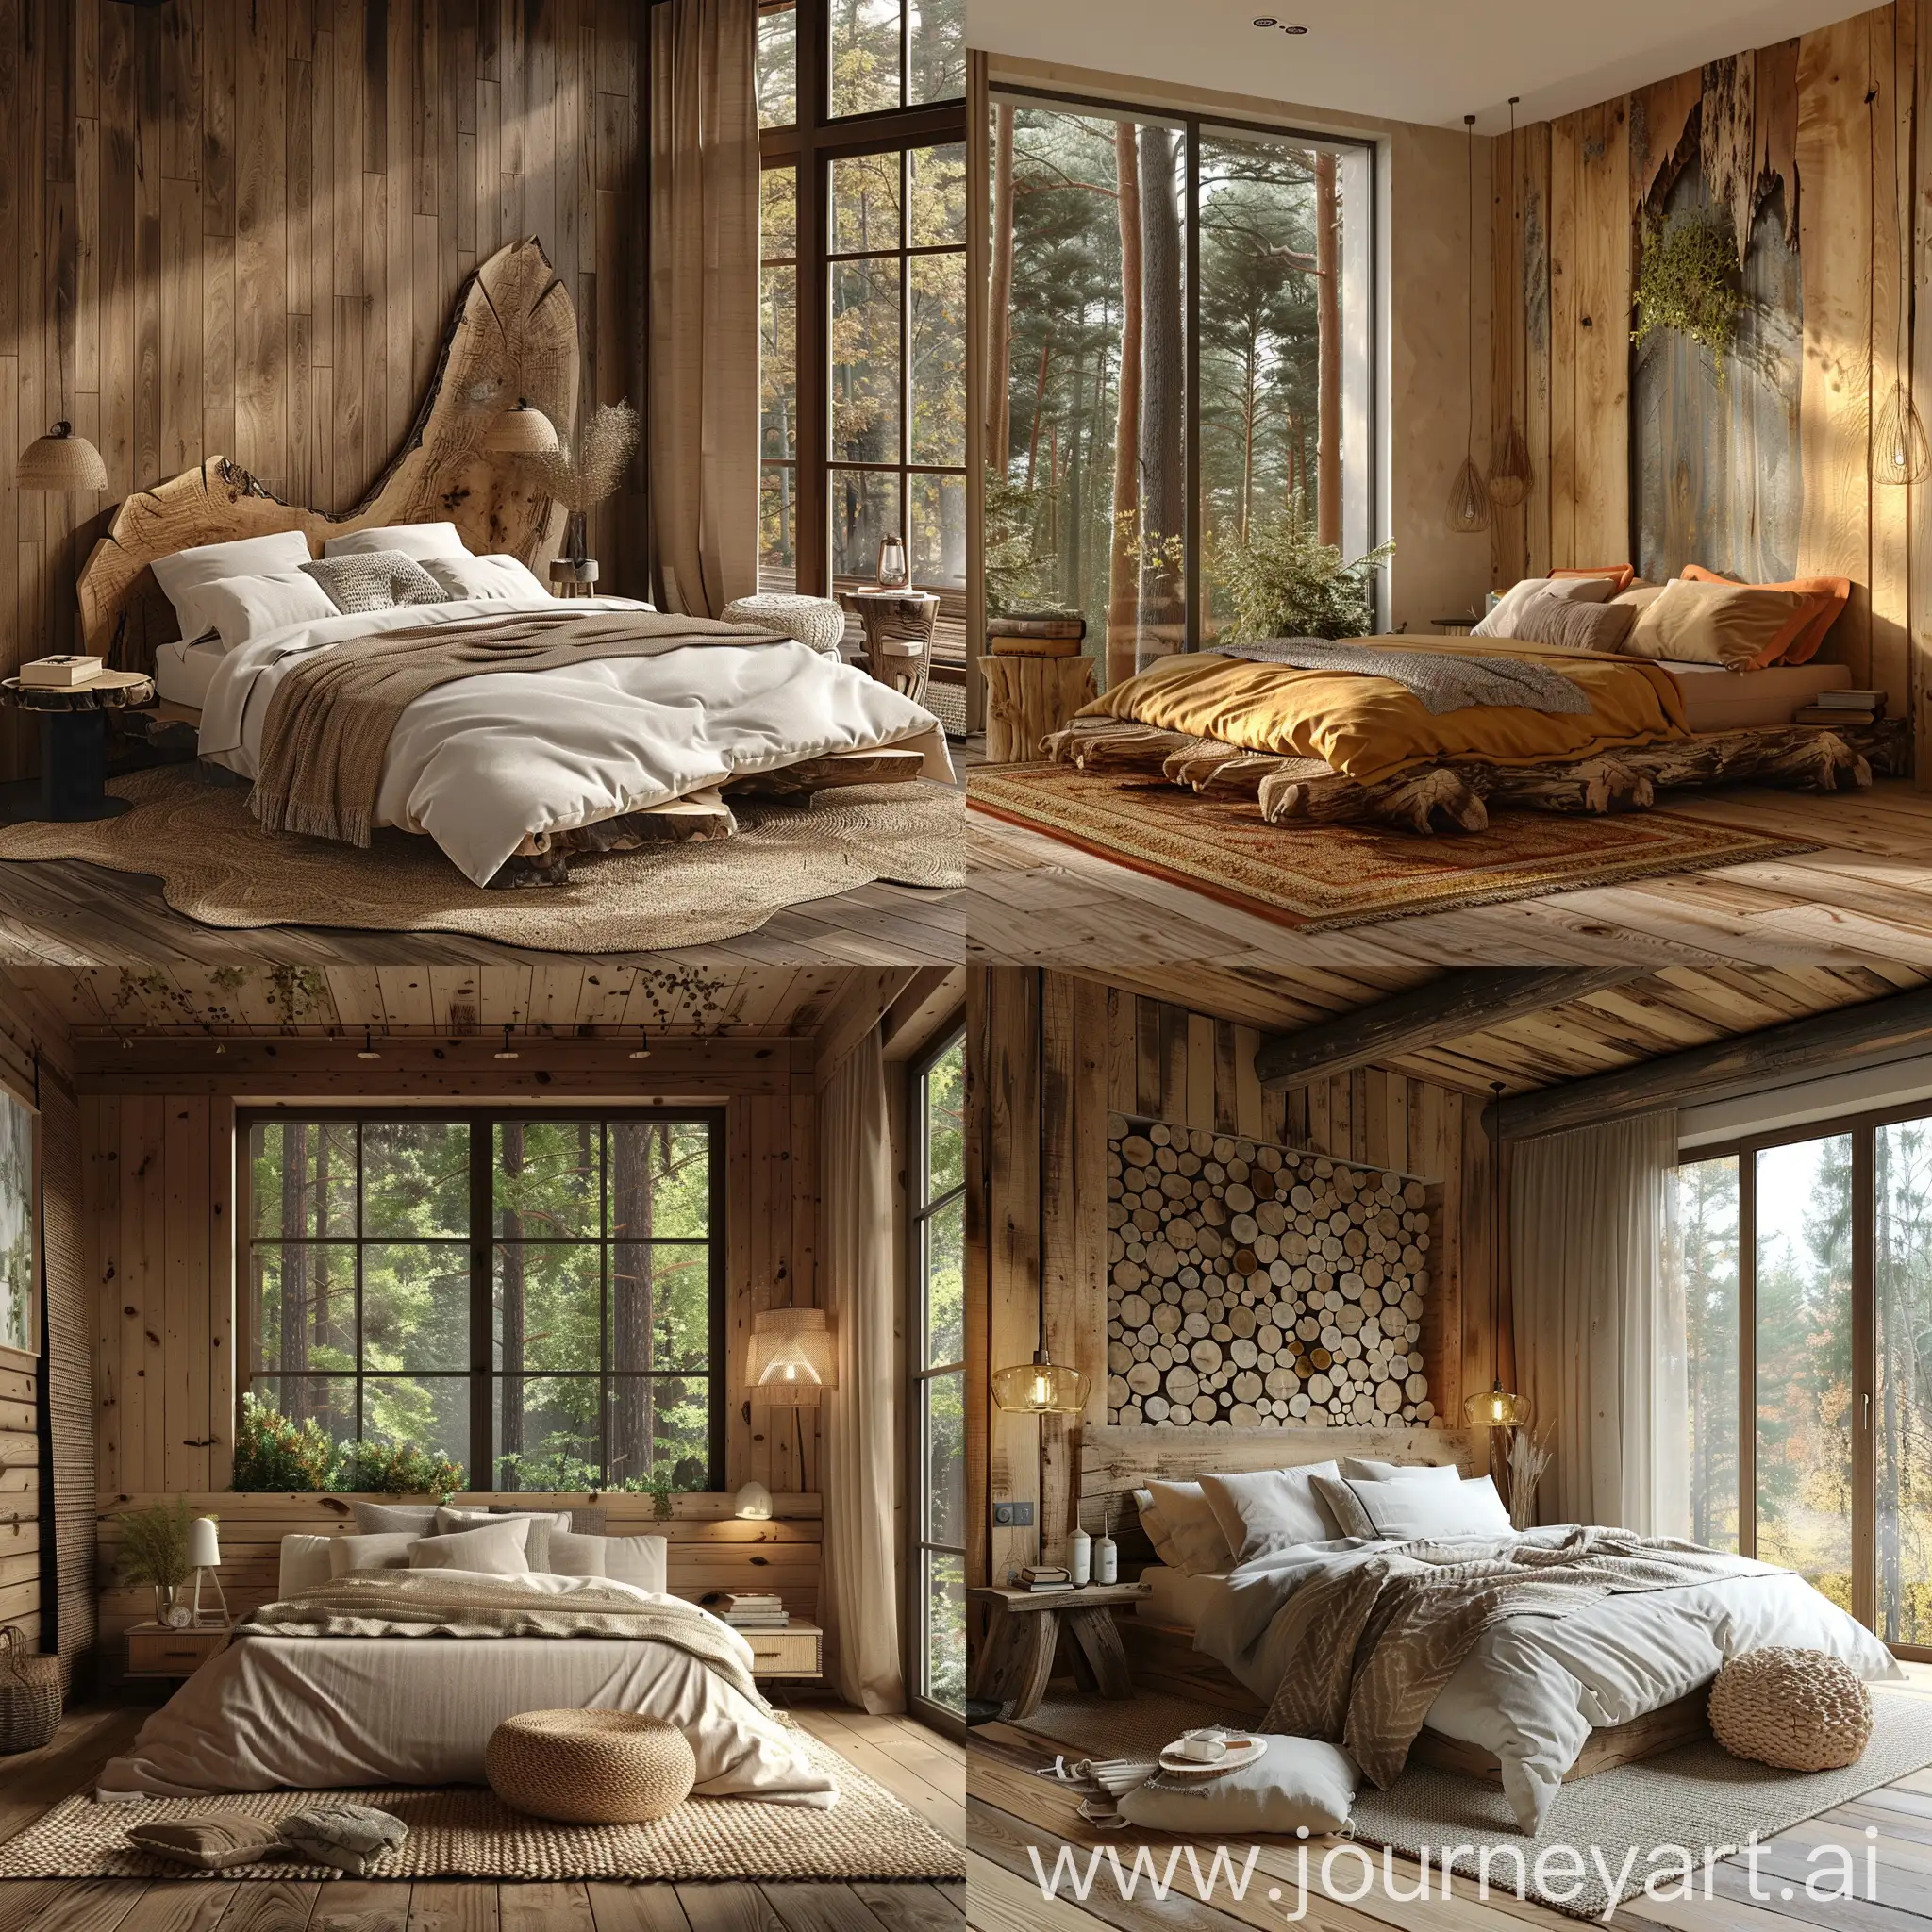 "Create an immersive forest retreat with natural wood elements in a bedroom themed after the tranquil ambiance of the woods. Imagine designing the perfect forest-themed bedroom where every detail, from the furniture to the decor, embodies the essence of nature. How would you integrate different types of wood, textures, and colors to evoke a sense of serenity and connection with the outdoors? Explore your vision for a space that blends rustic charm with modern comfort, using natural wood elements to bring the forest indoors."



